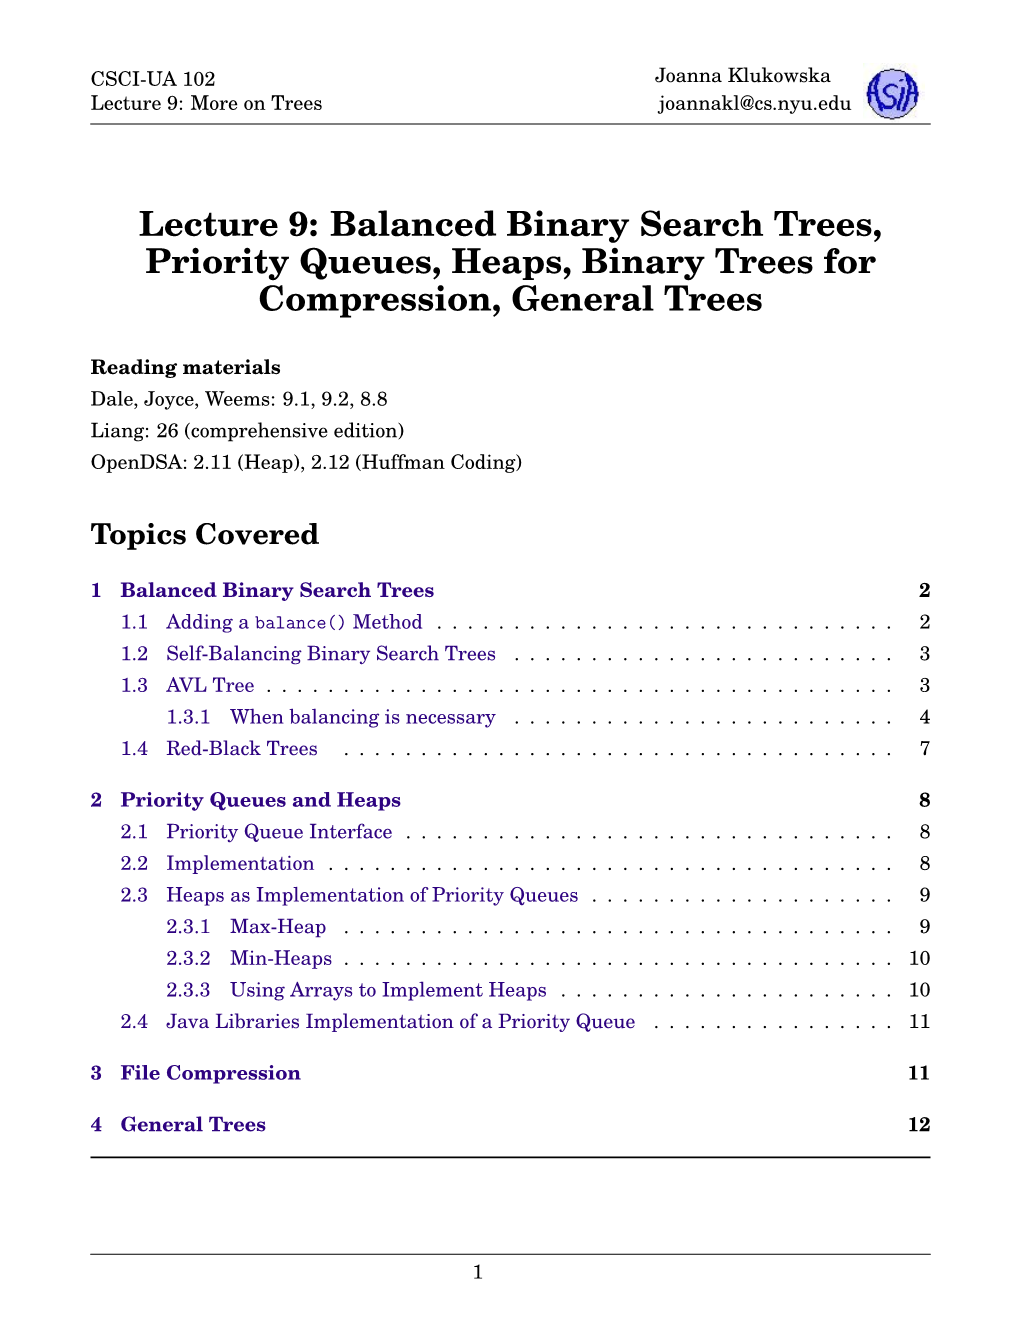 Lecture 9: Balanced Binary Search Trees, Priority Queues, Heaps, Binary Trees for Compression, General Trees